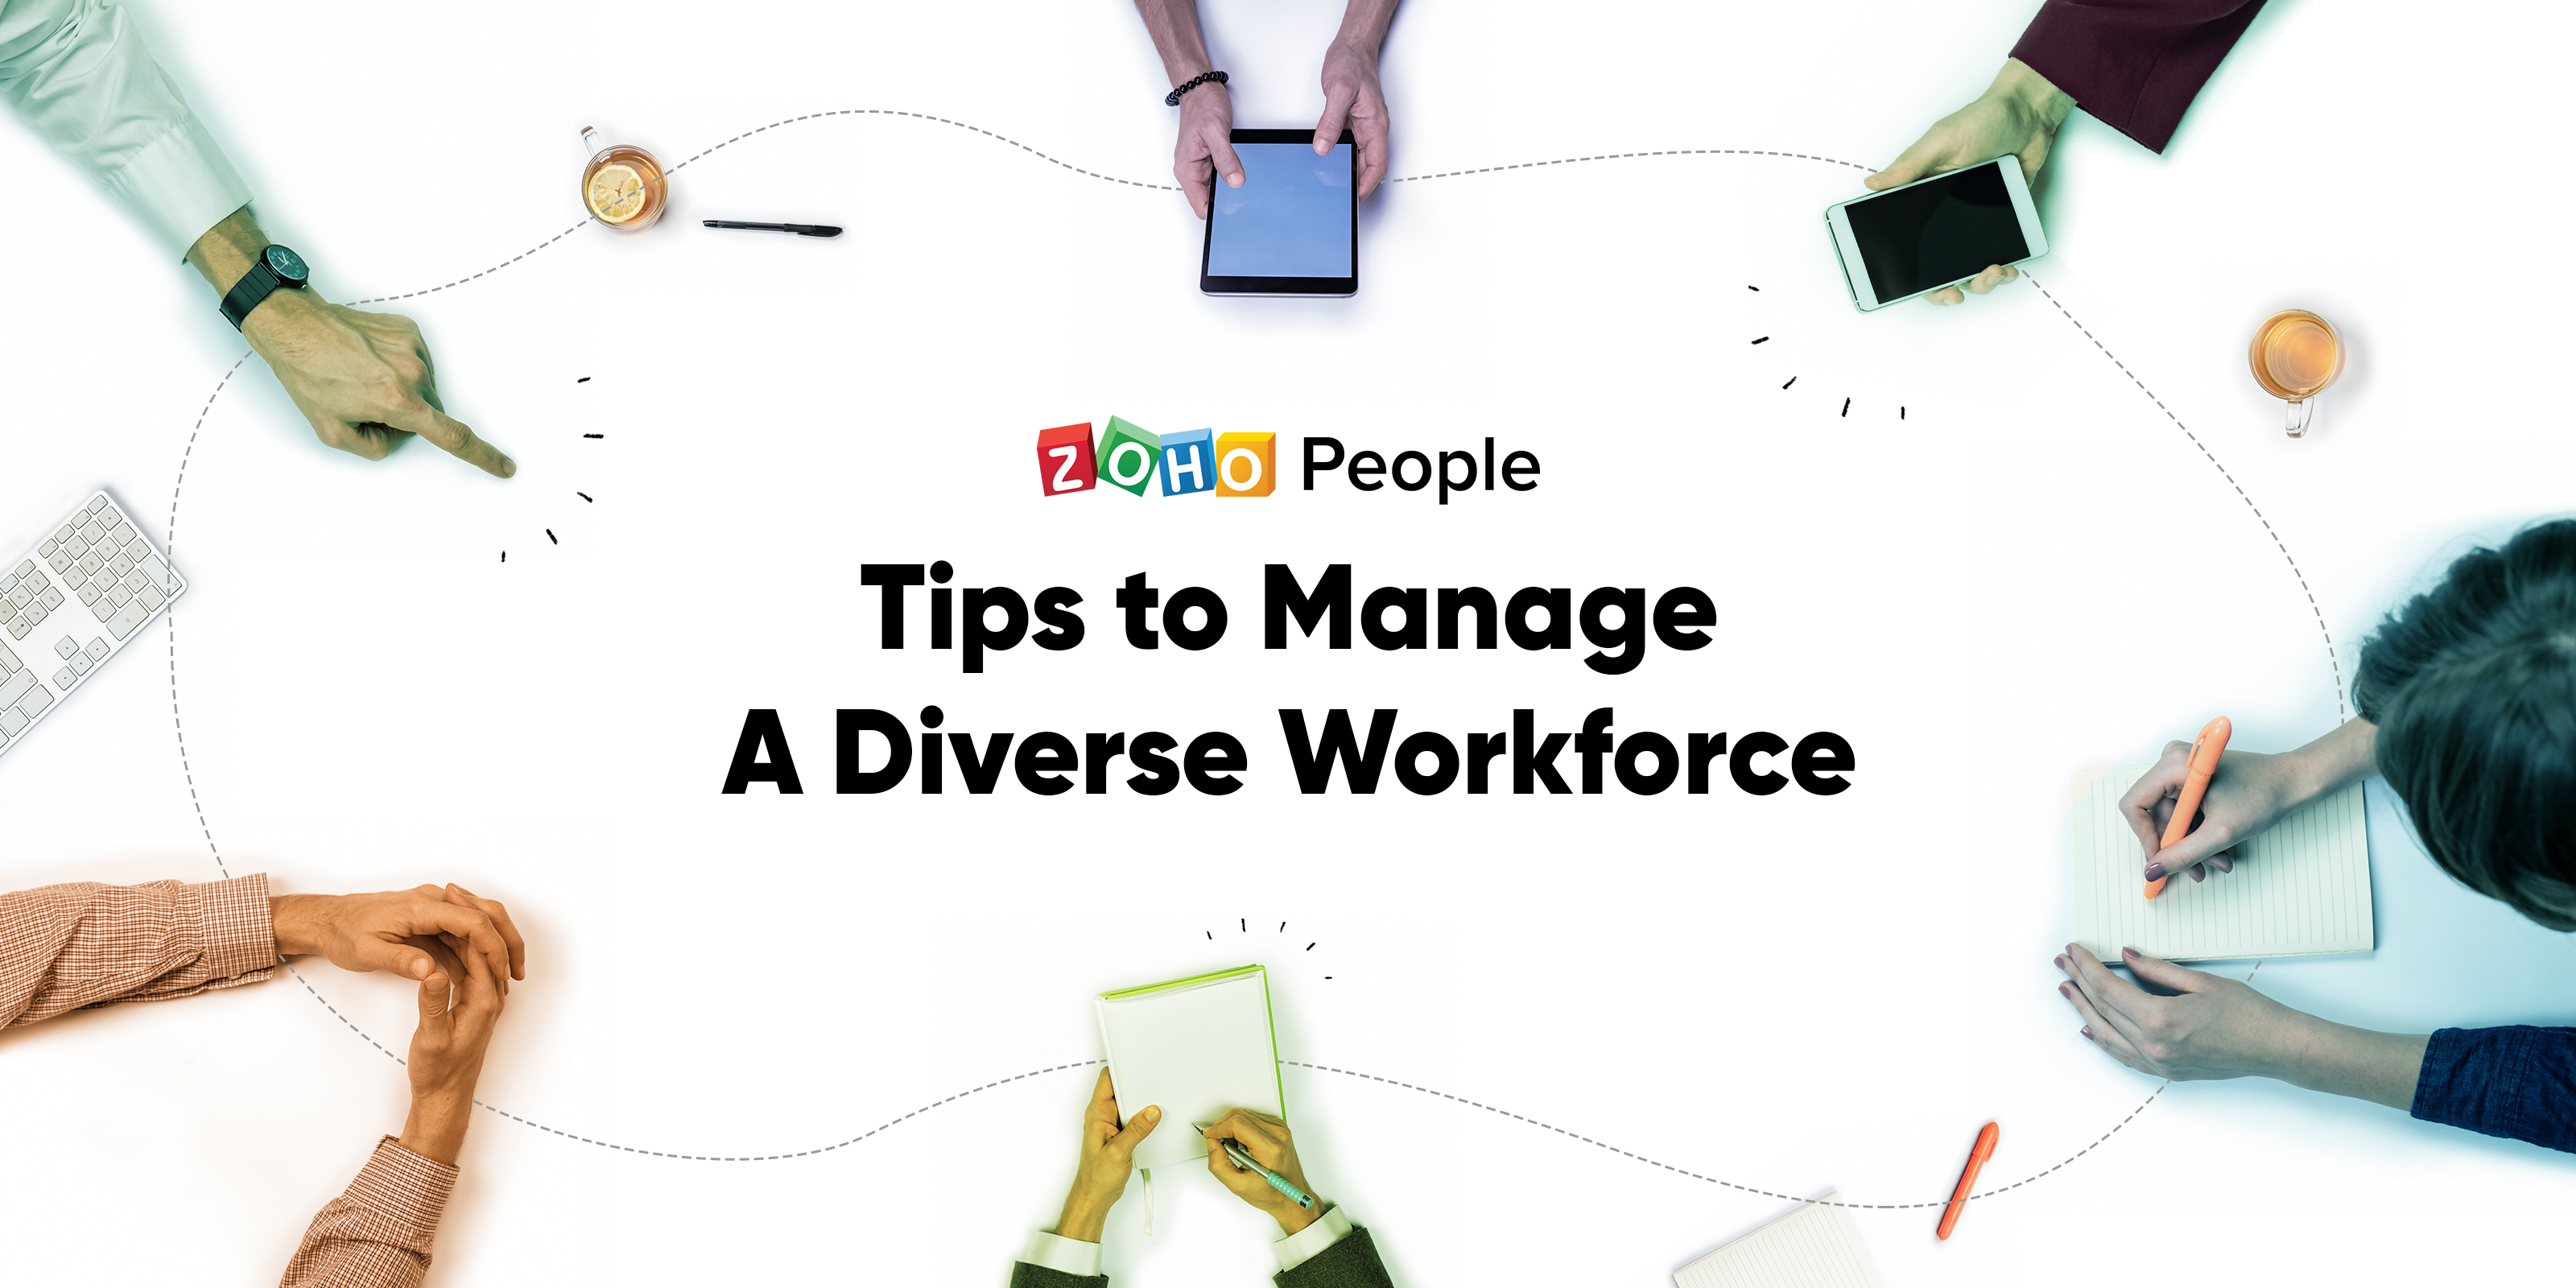 6 tips to manage a diverse workforce